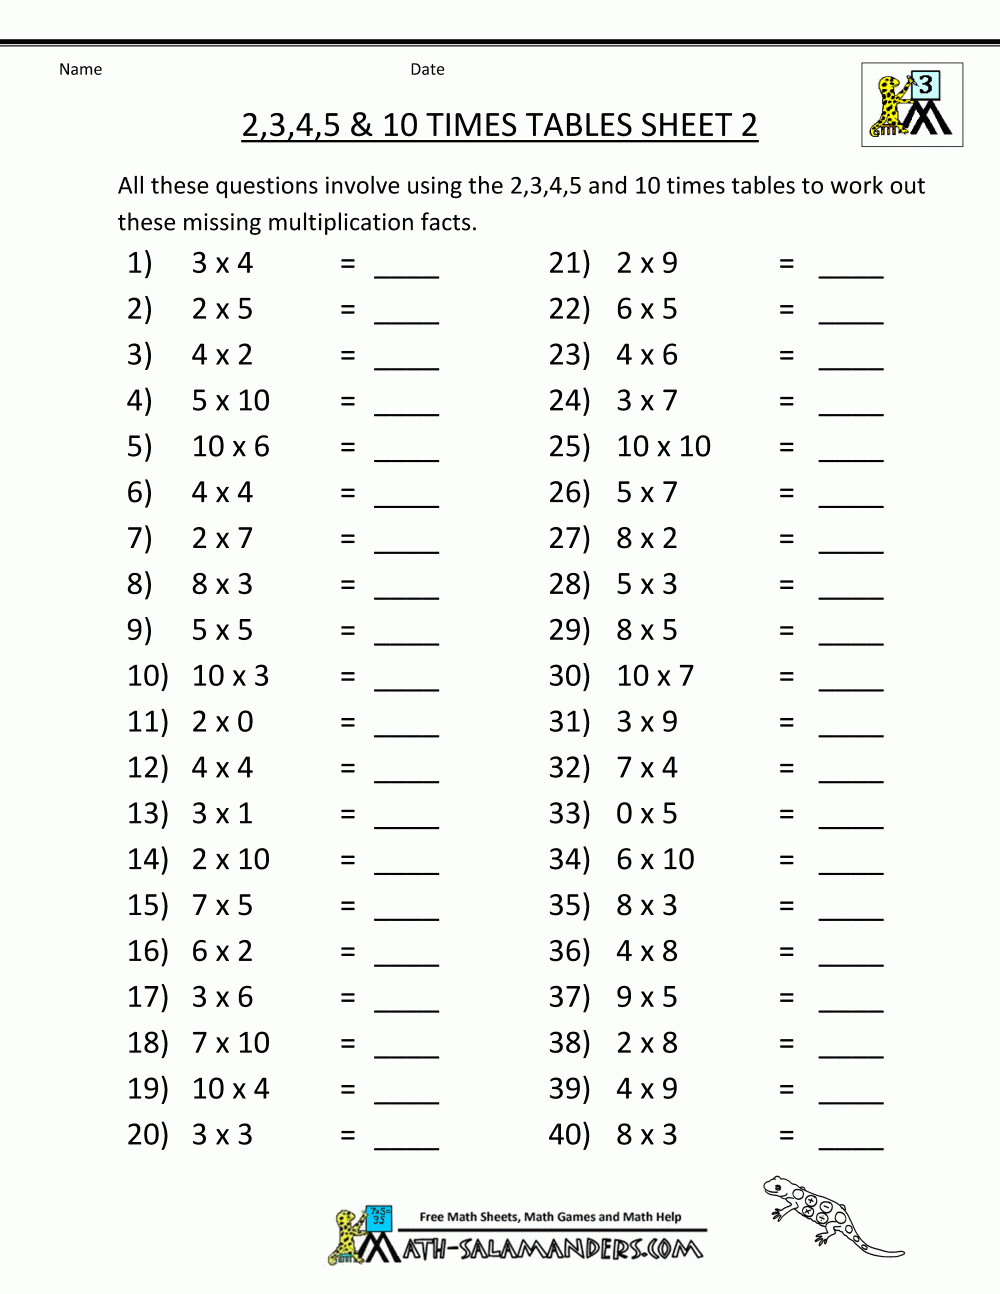 Free Printable Math Sheets Multiplication 2 3 4 5 10 Times within Multiplication Worksheets K12